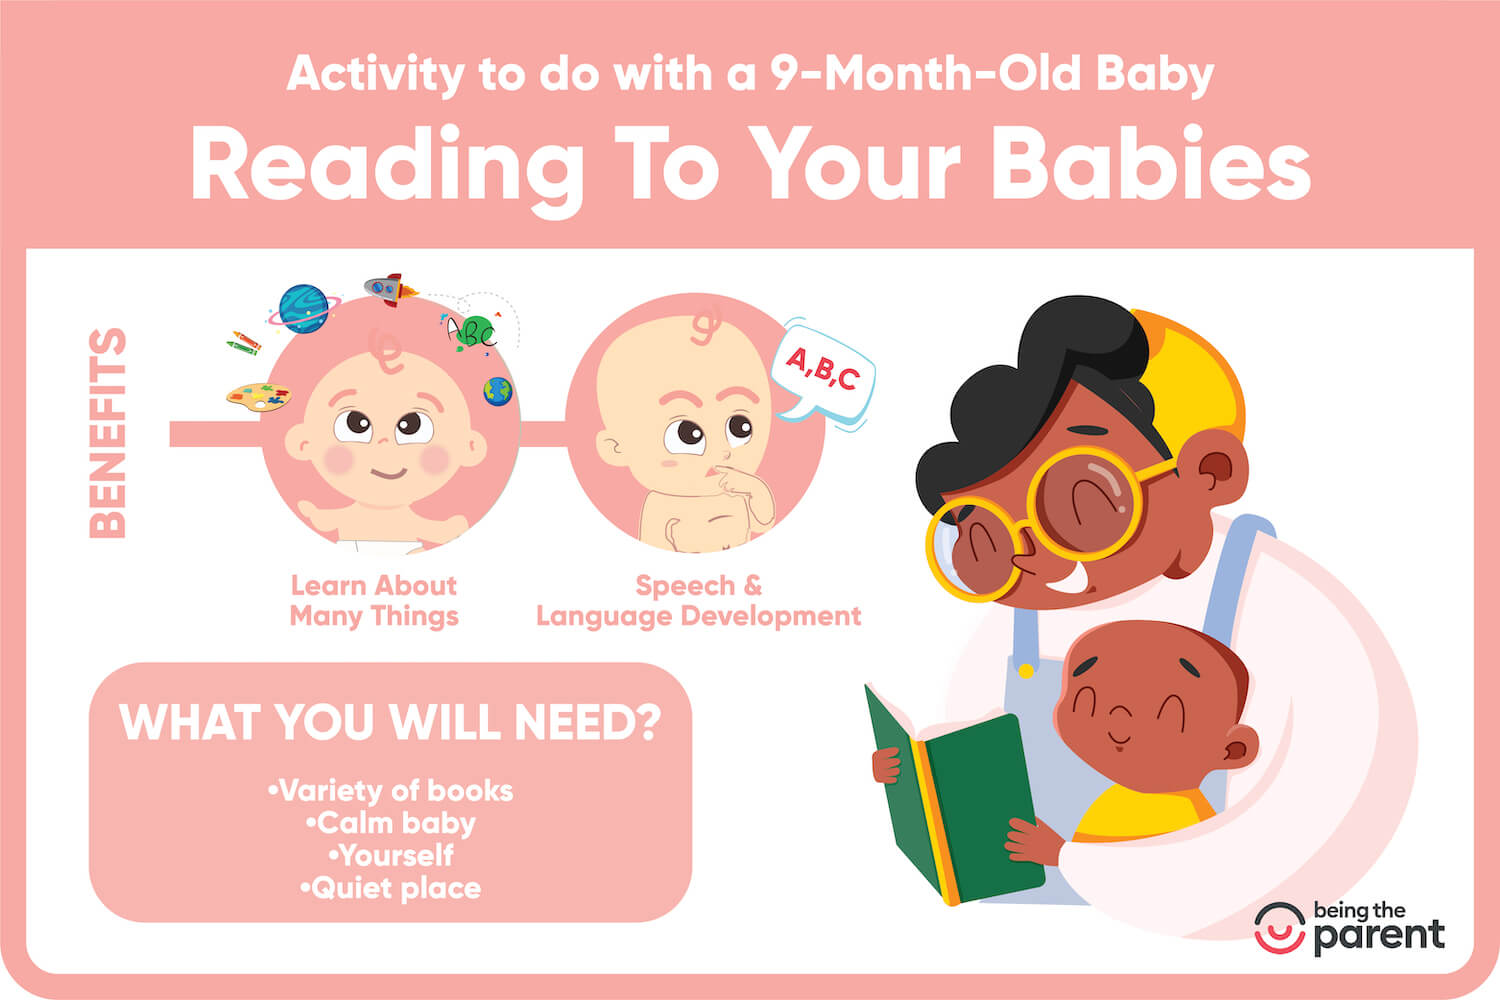 Reading to your babies